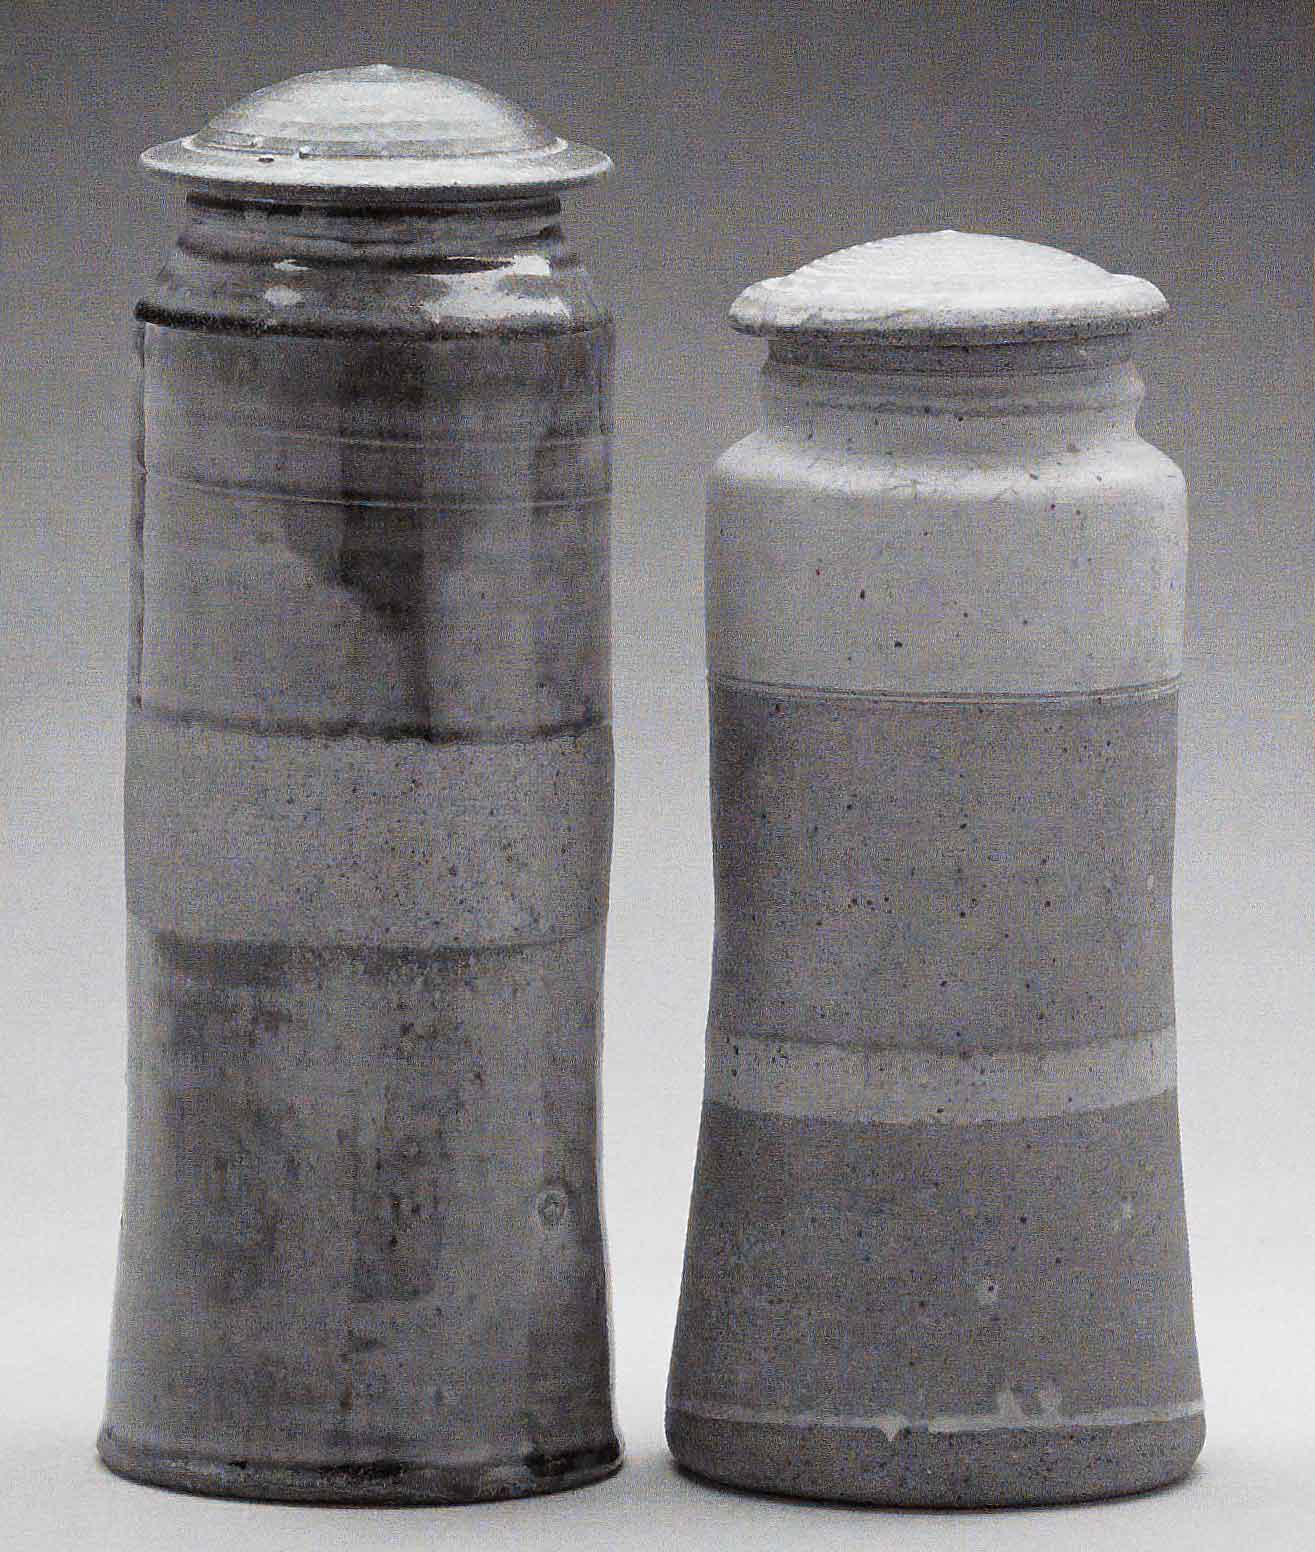 Heirloom Jars (Left) November 2003. Cone 11 woodfired stoneware, ash glaze over porcelain slip. H 12&quot; x W 5&quot;. (Right) March 1972, bisqued, Cone 10 gas reduction stoneware, spodumene glaze. H 10.25&quot; x W 5&quot;. Photograph by VanZandenbergen.